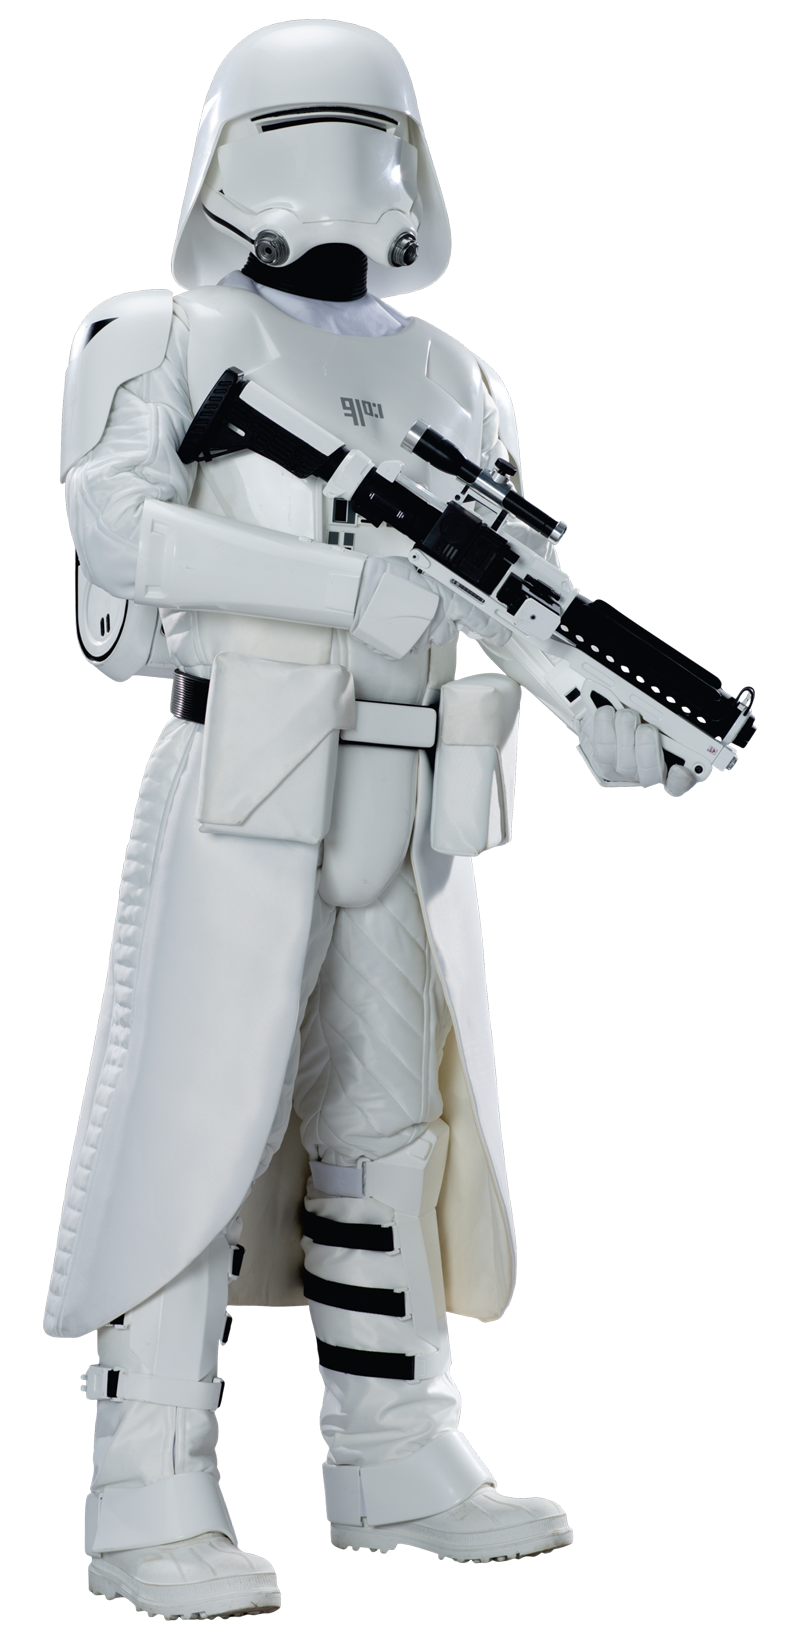 First Order Snowtrooper